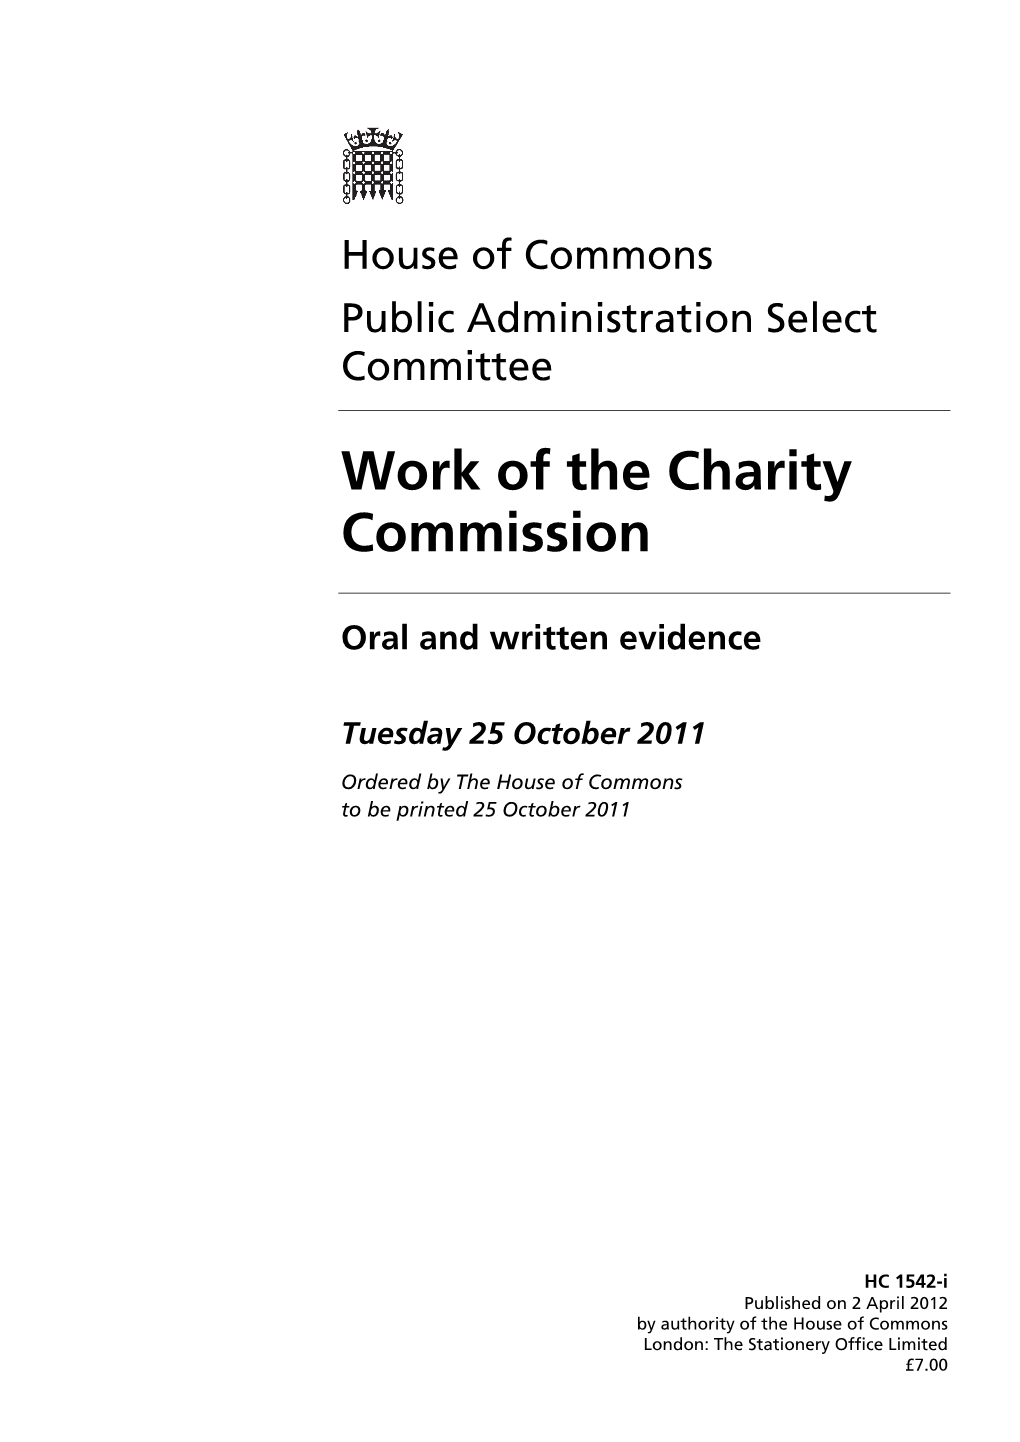 Work of the Charity Commission